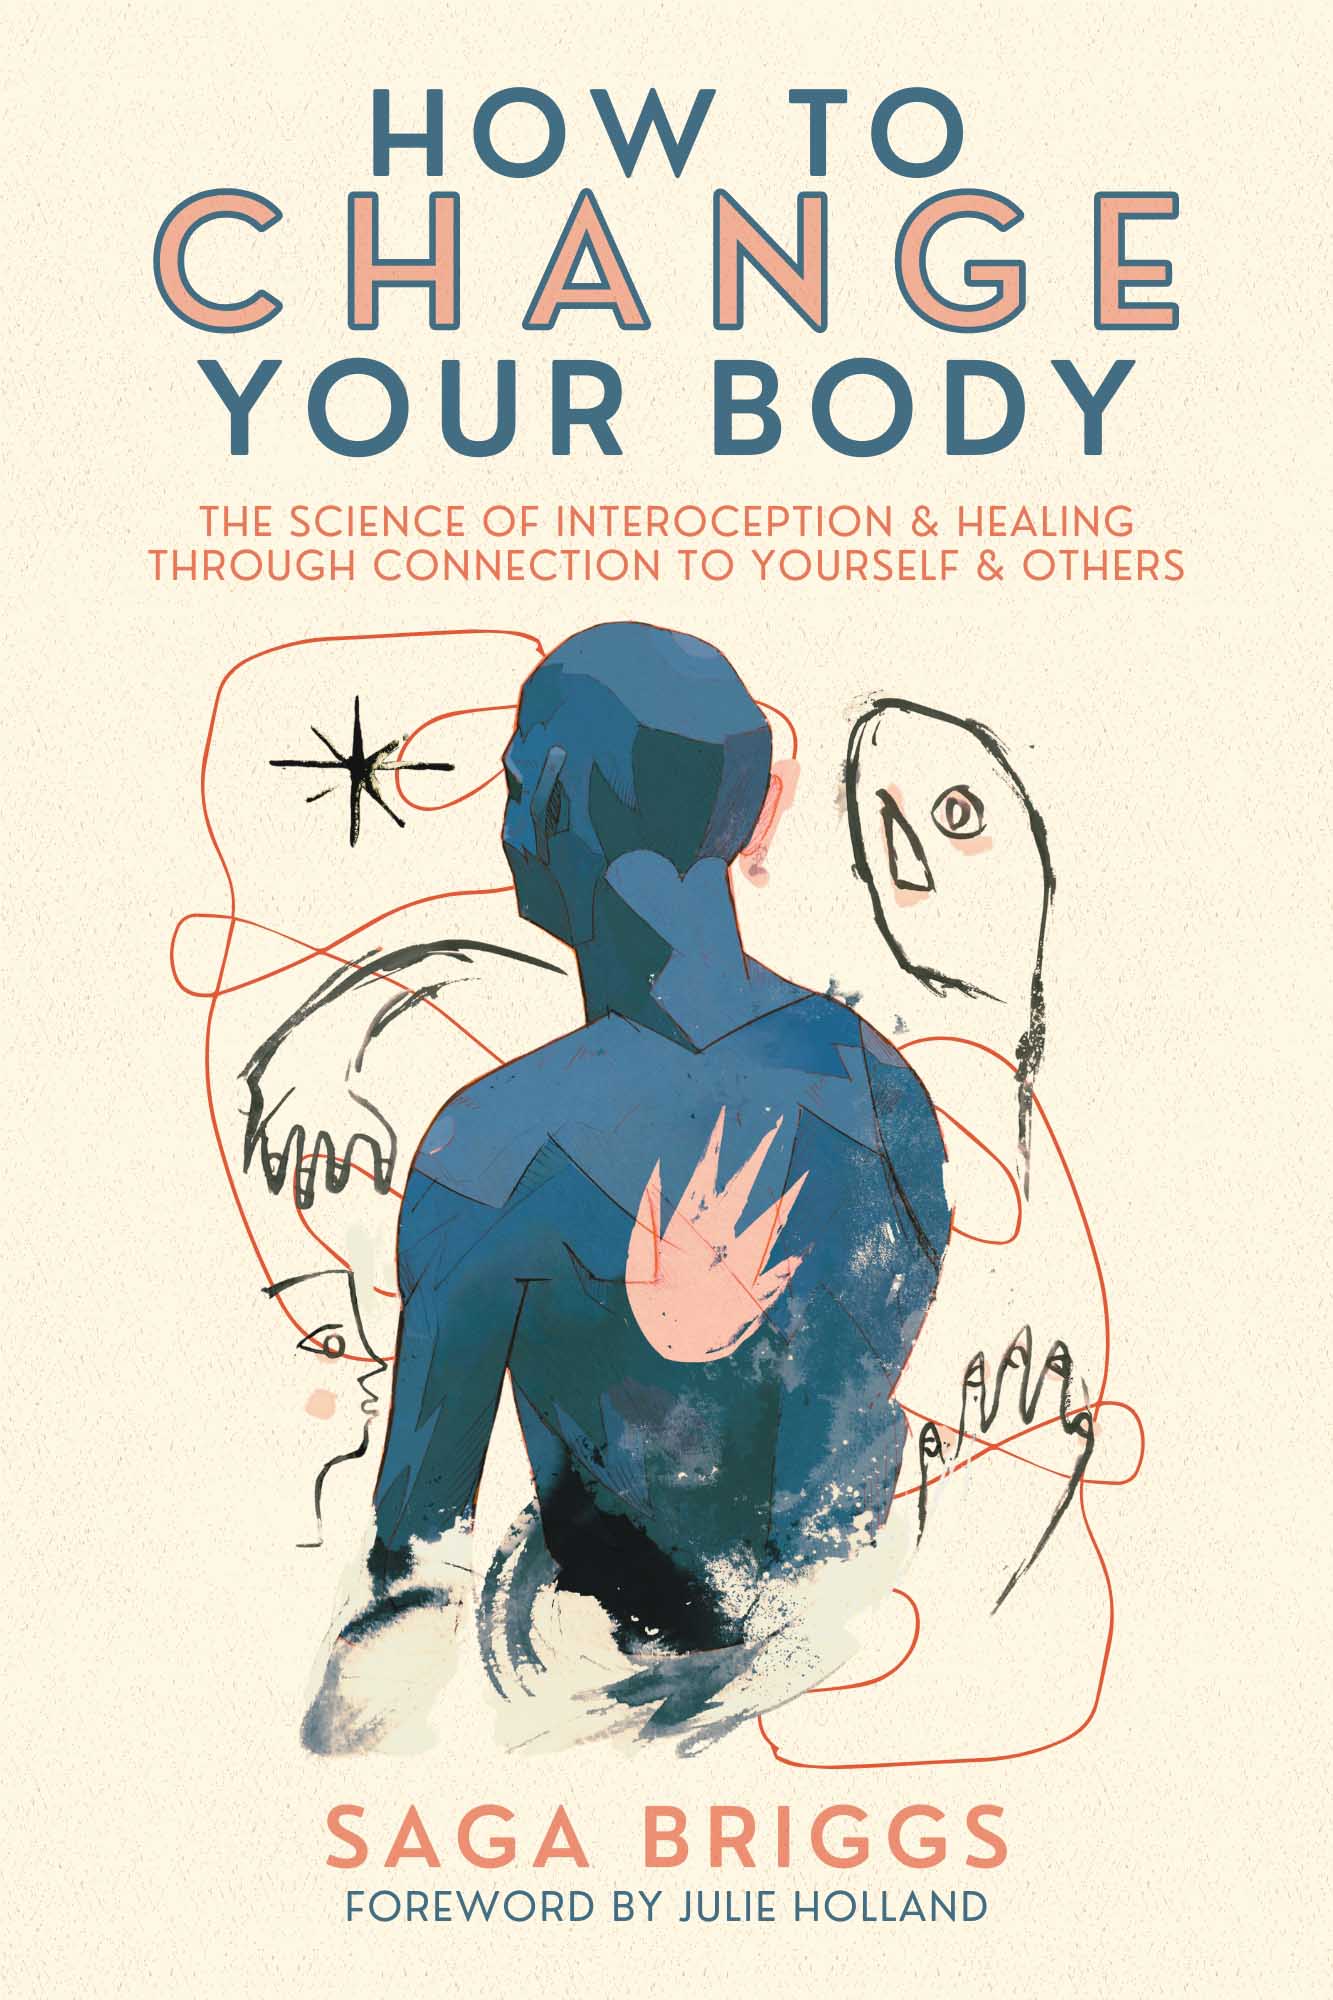 How to Change Your Body: The Science of Interoception and Healing Through Connection to Yourself and Others